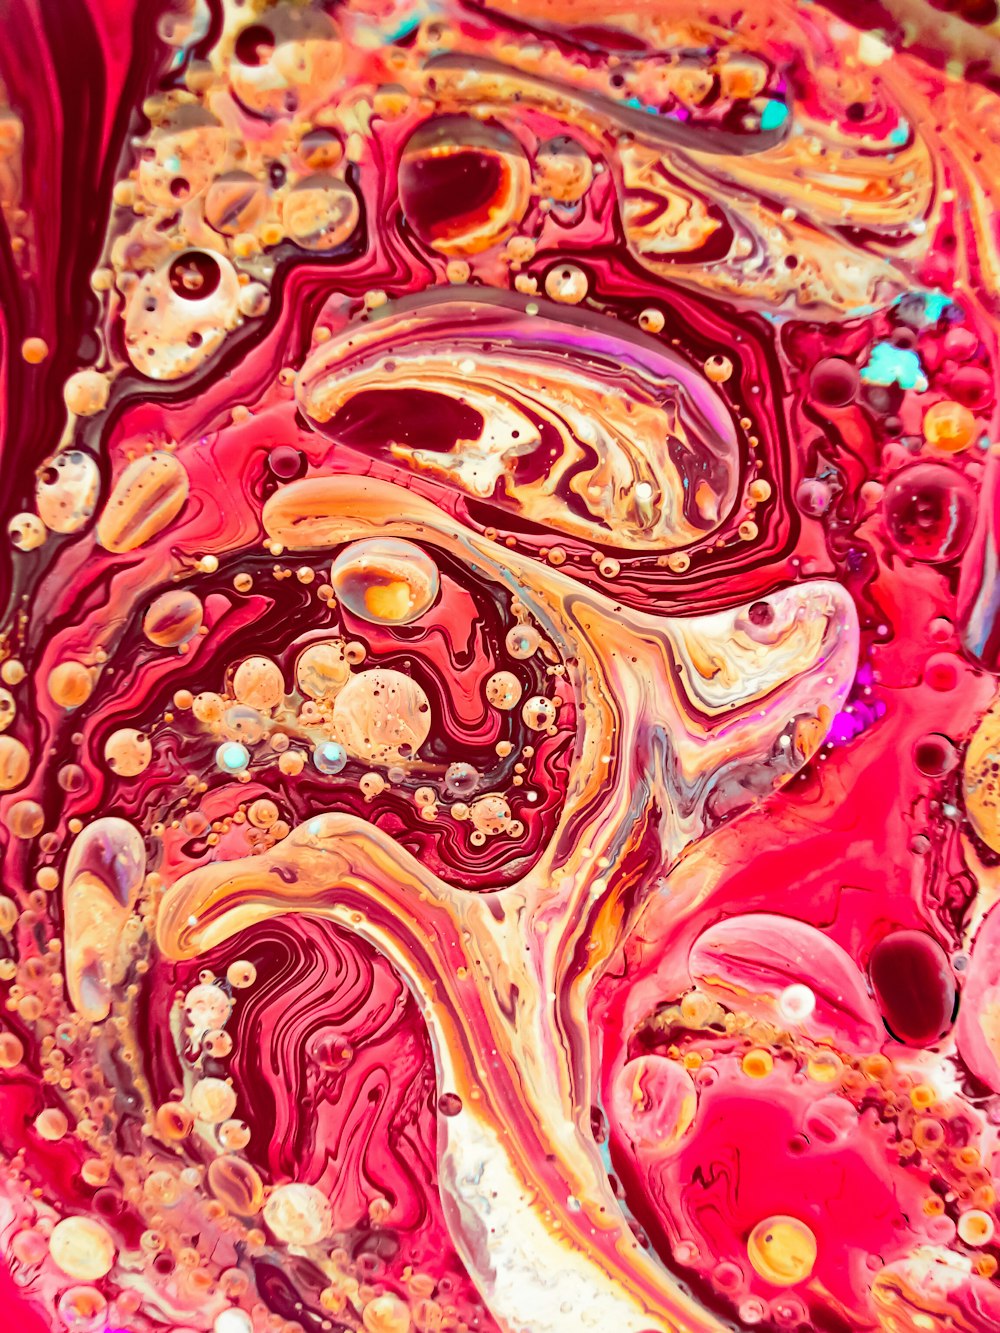 a close up of a red and yellow fluid substance